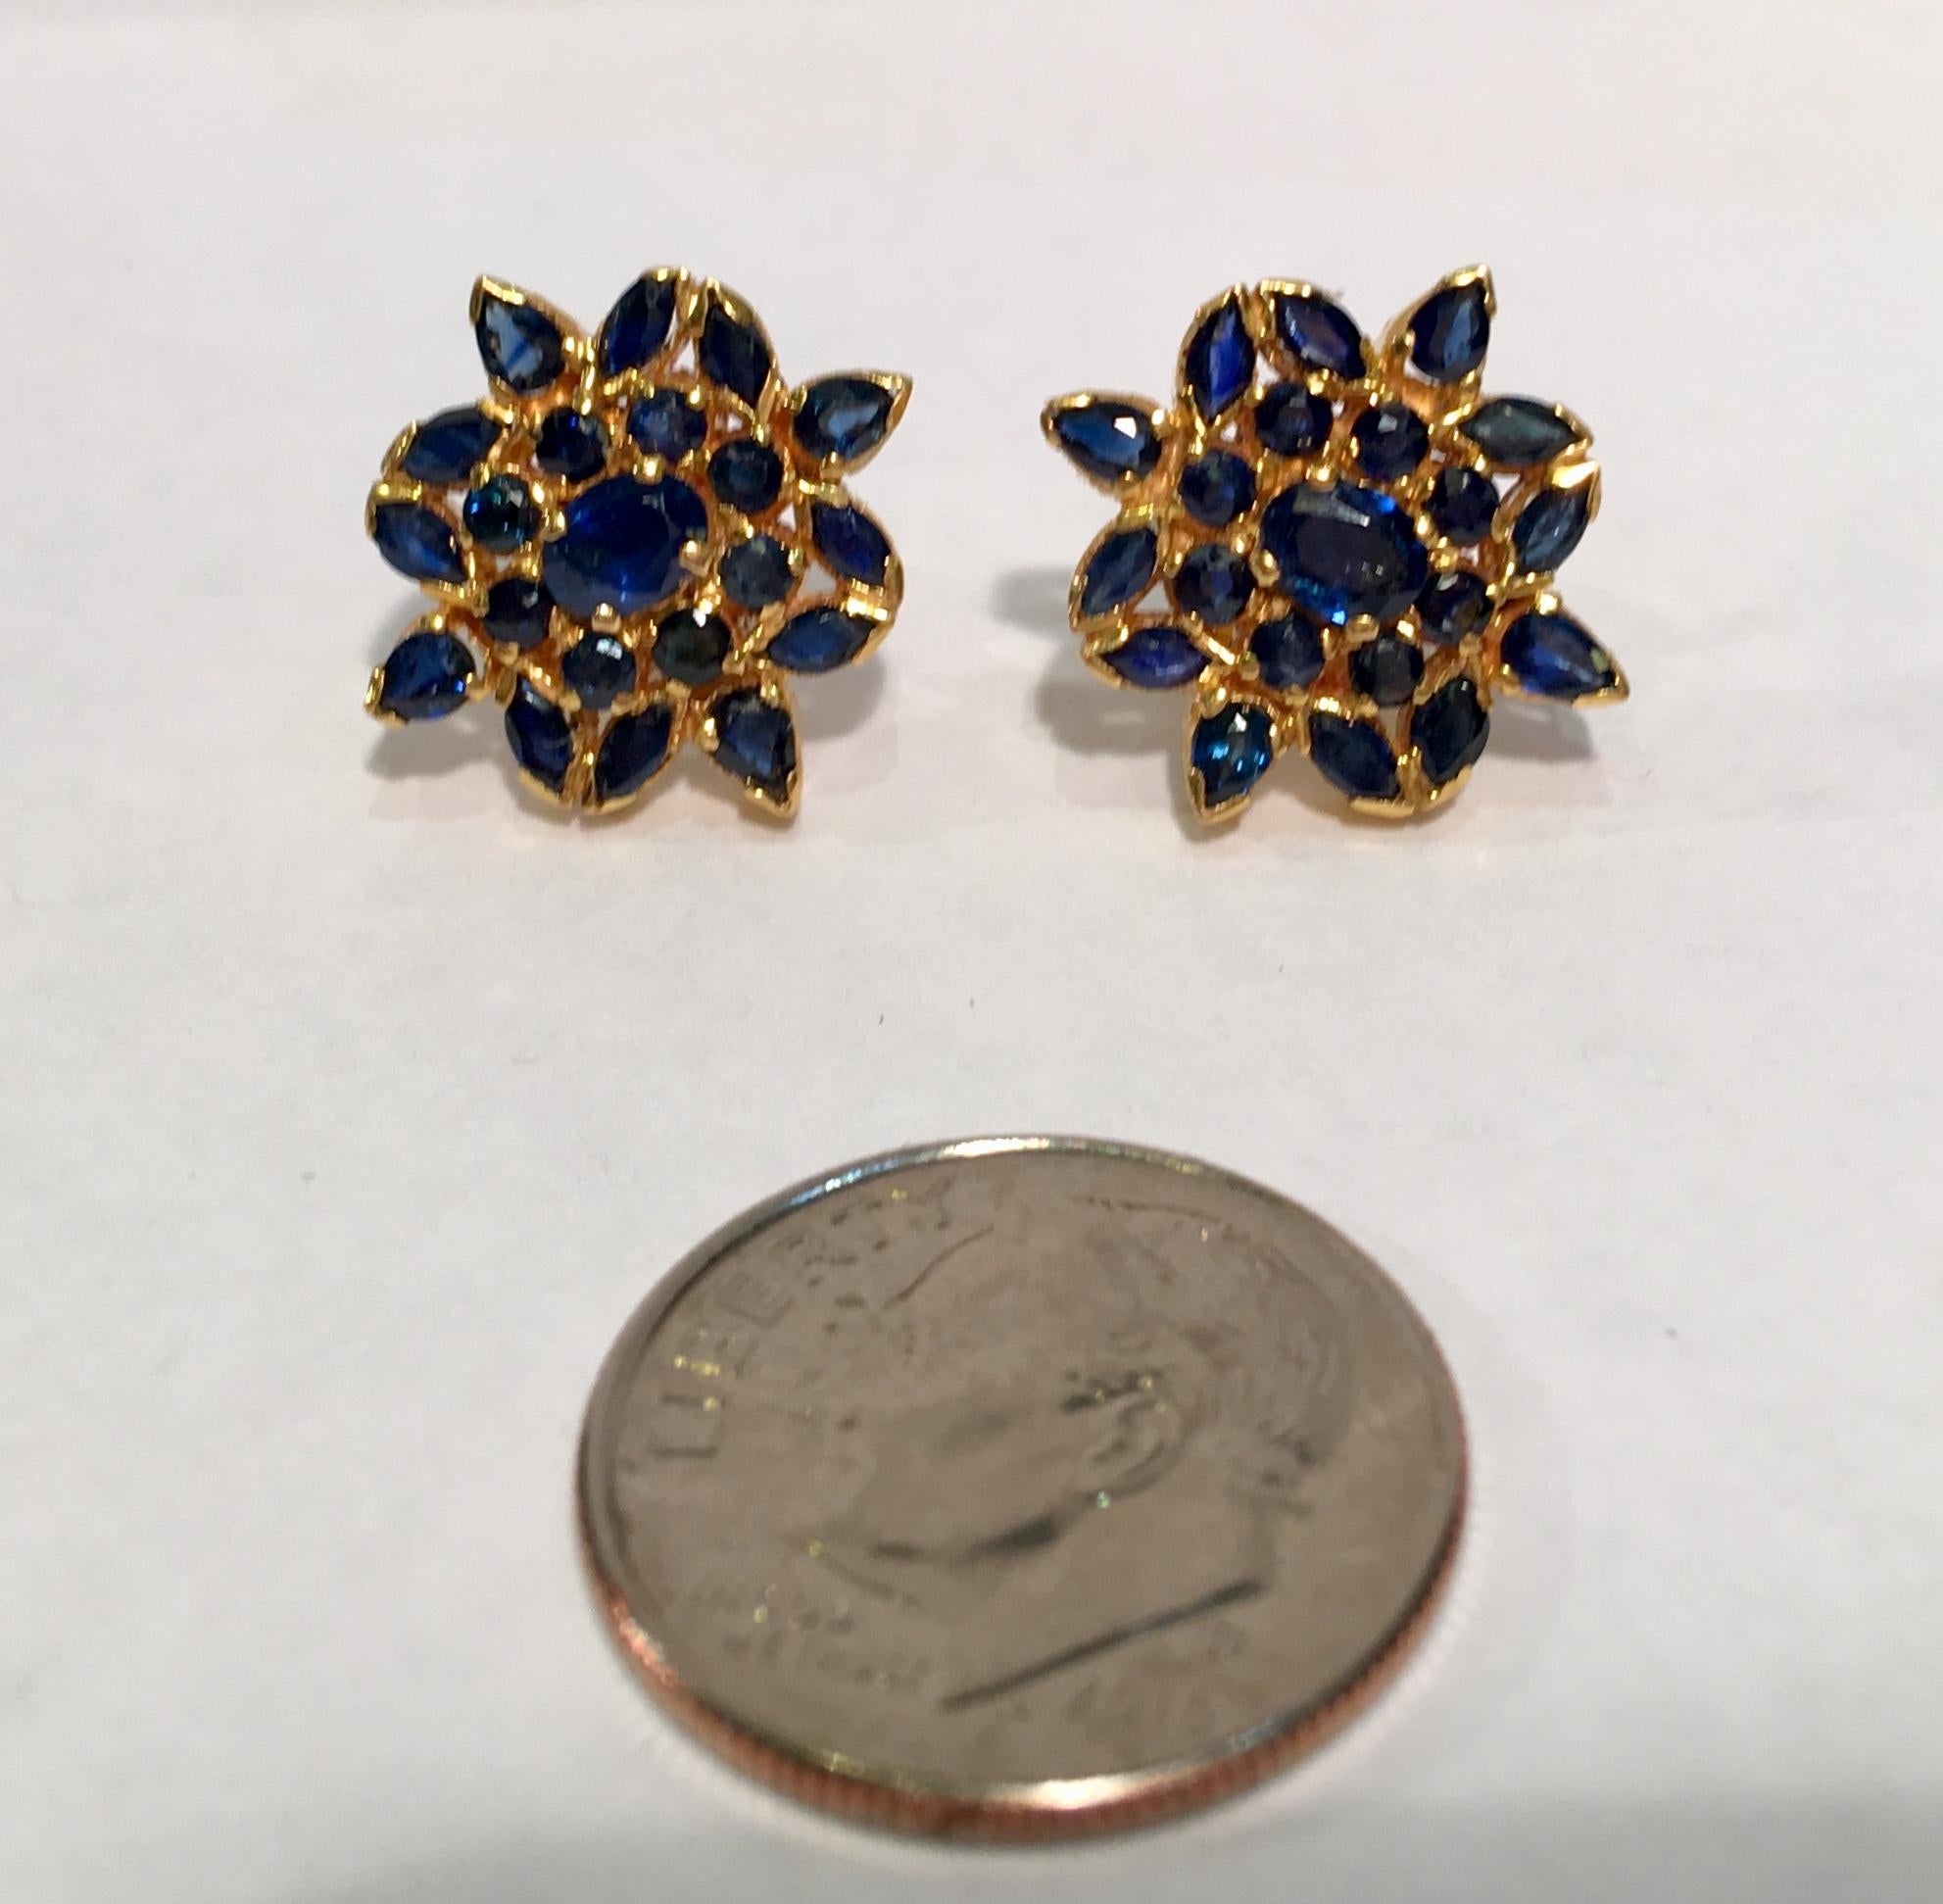 Elegantly proportioned and easy to wear 22 karat yellow gold estate earrings feature prong, tension and pave set oval, round, marquise and pear cut blue sapphires arranged in stylized snowflake or flower designs.  Posts feature screw backs for